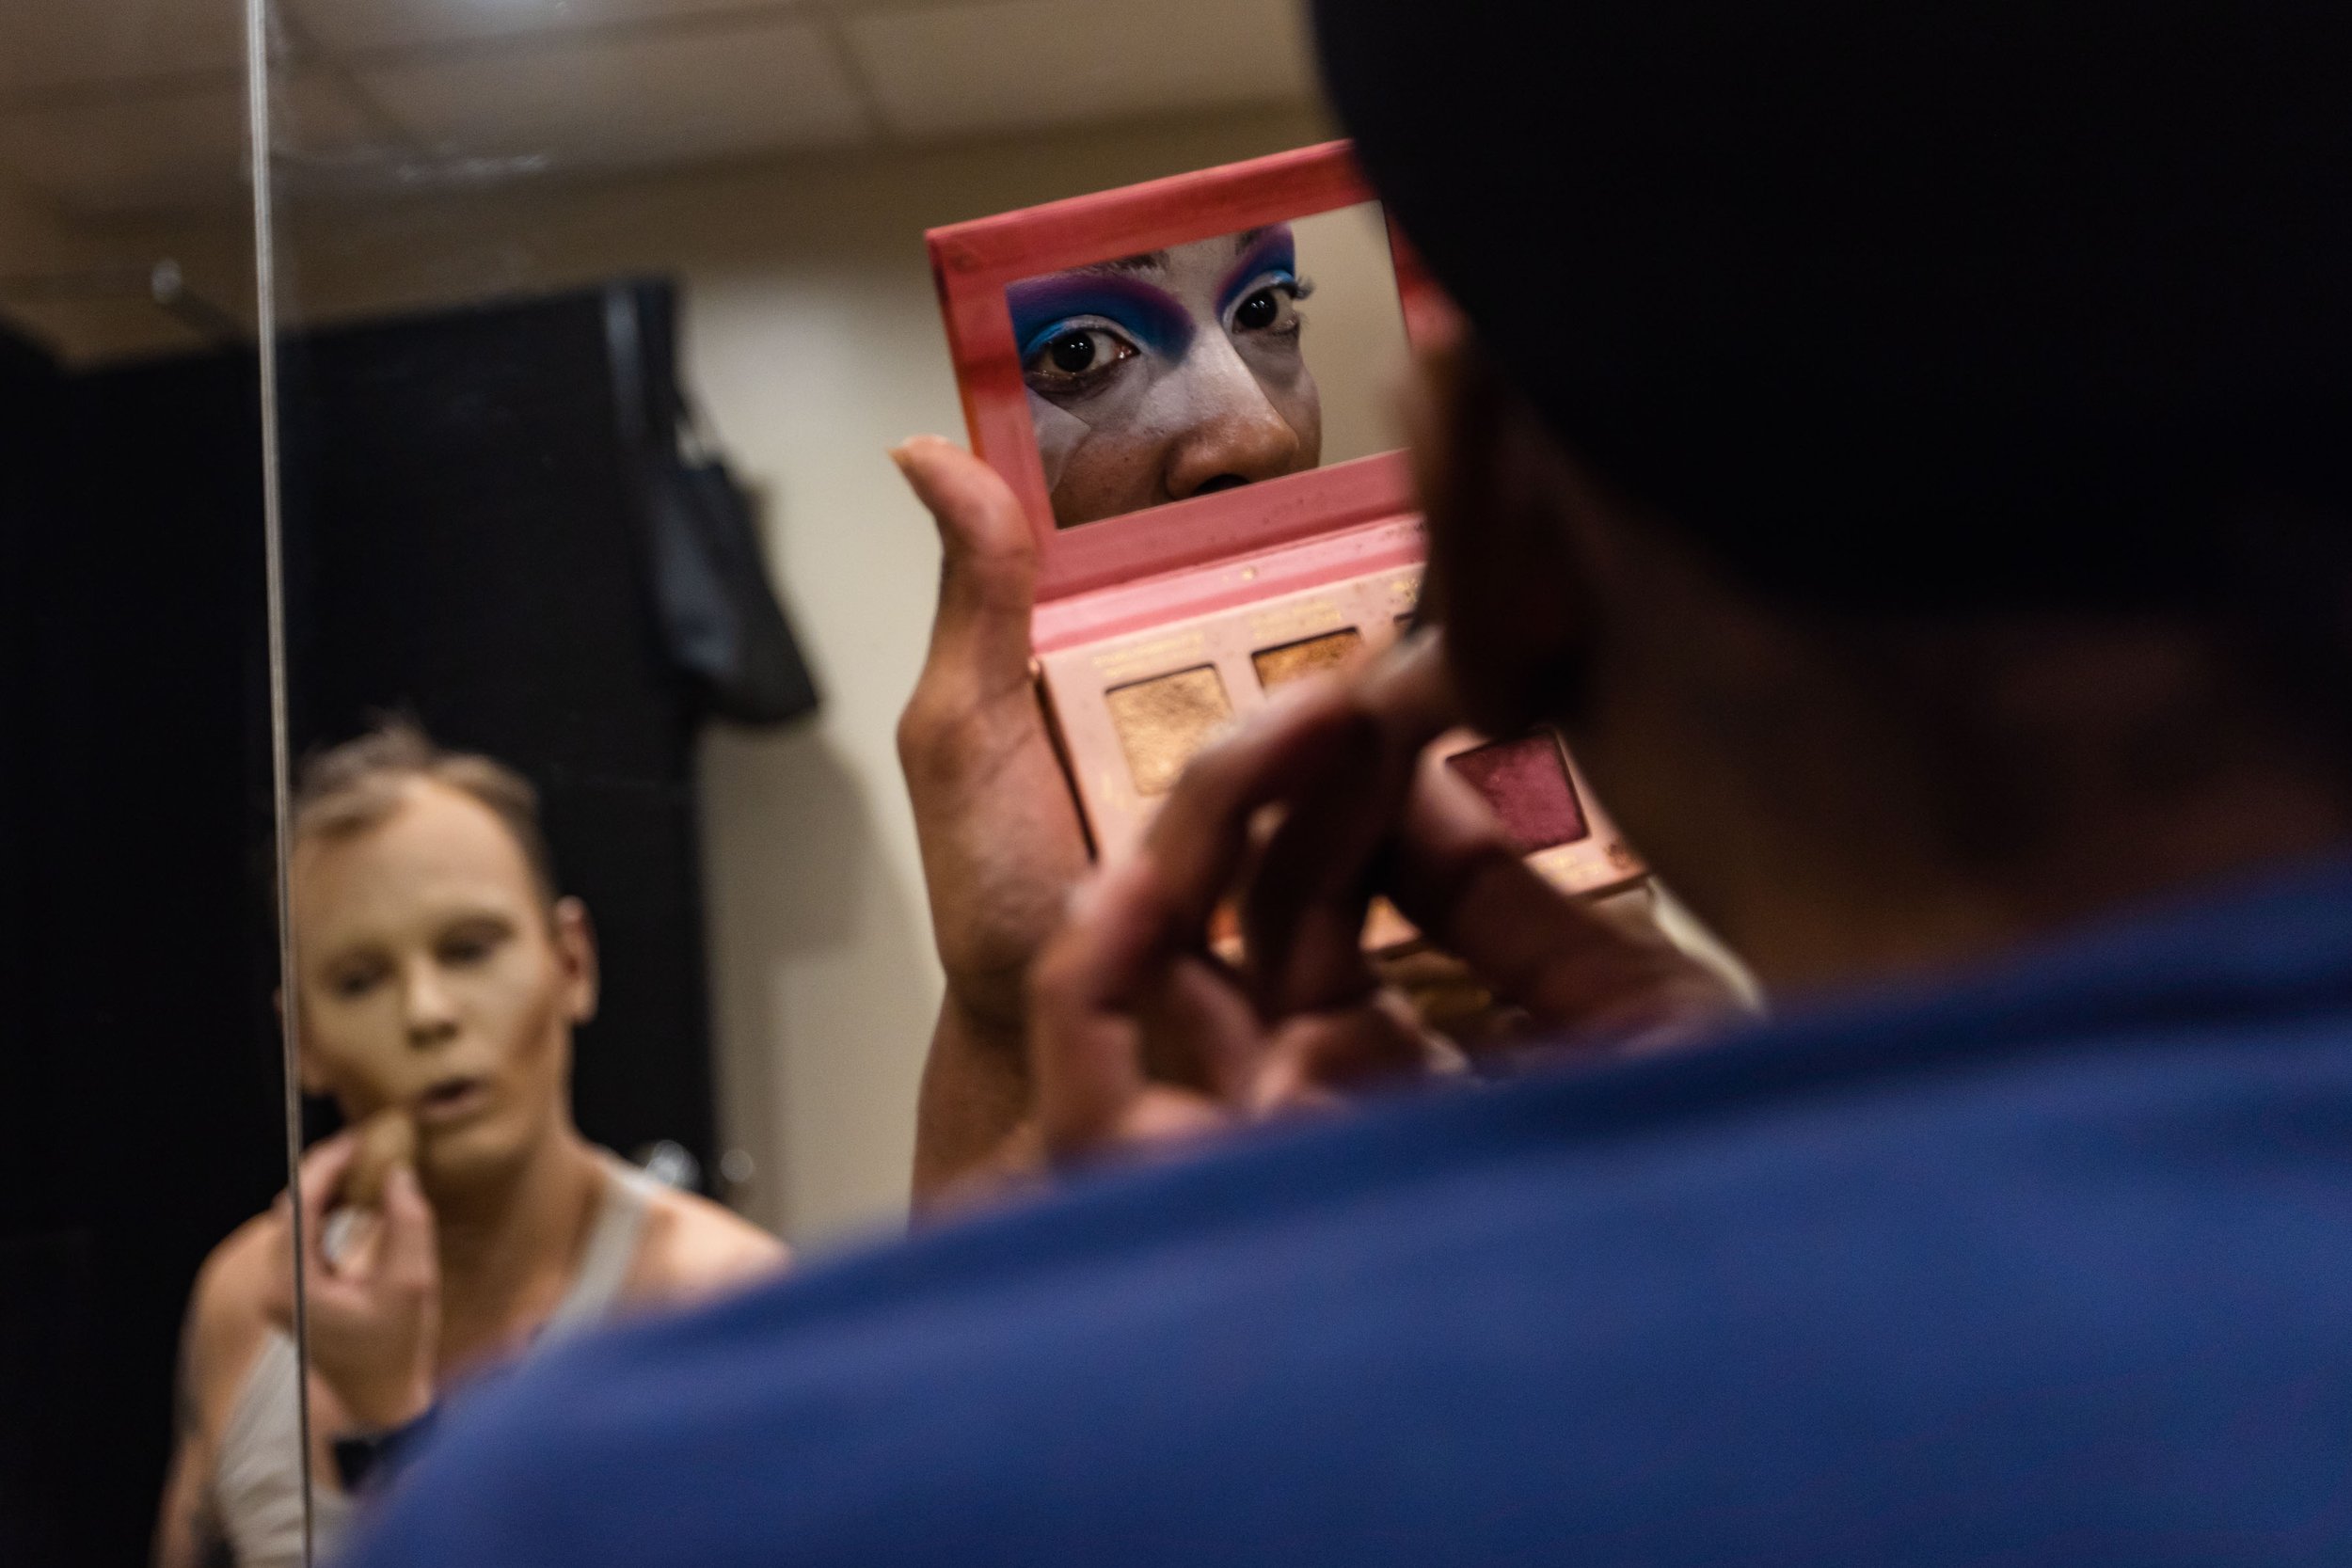  Hampton Roads drag queen Lola Monroe, right, applies makeup in a dressing room with drag queen Gillette Belladonna before performing at NorVa's Studio 54 PrideFest Block Party in Norfolk, Va. on Friday, June 23, 2023. (Tess Crowley / The Virginian-P